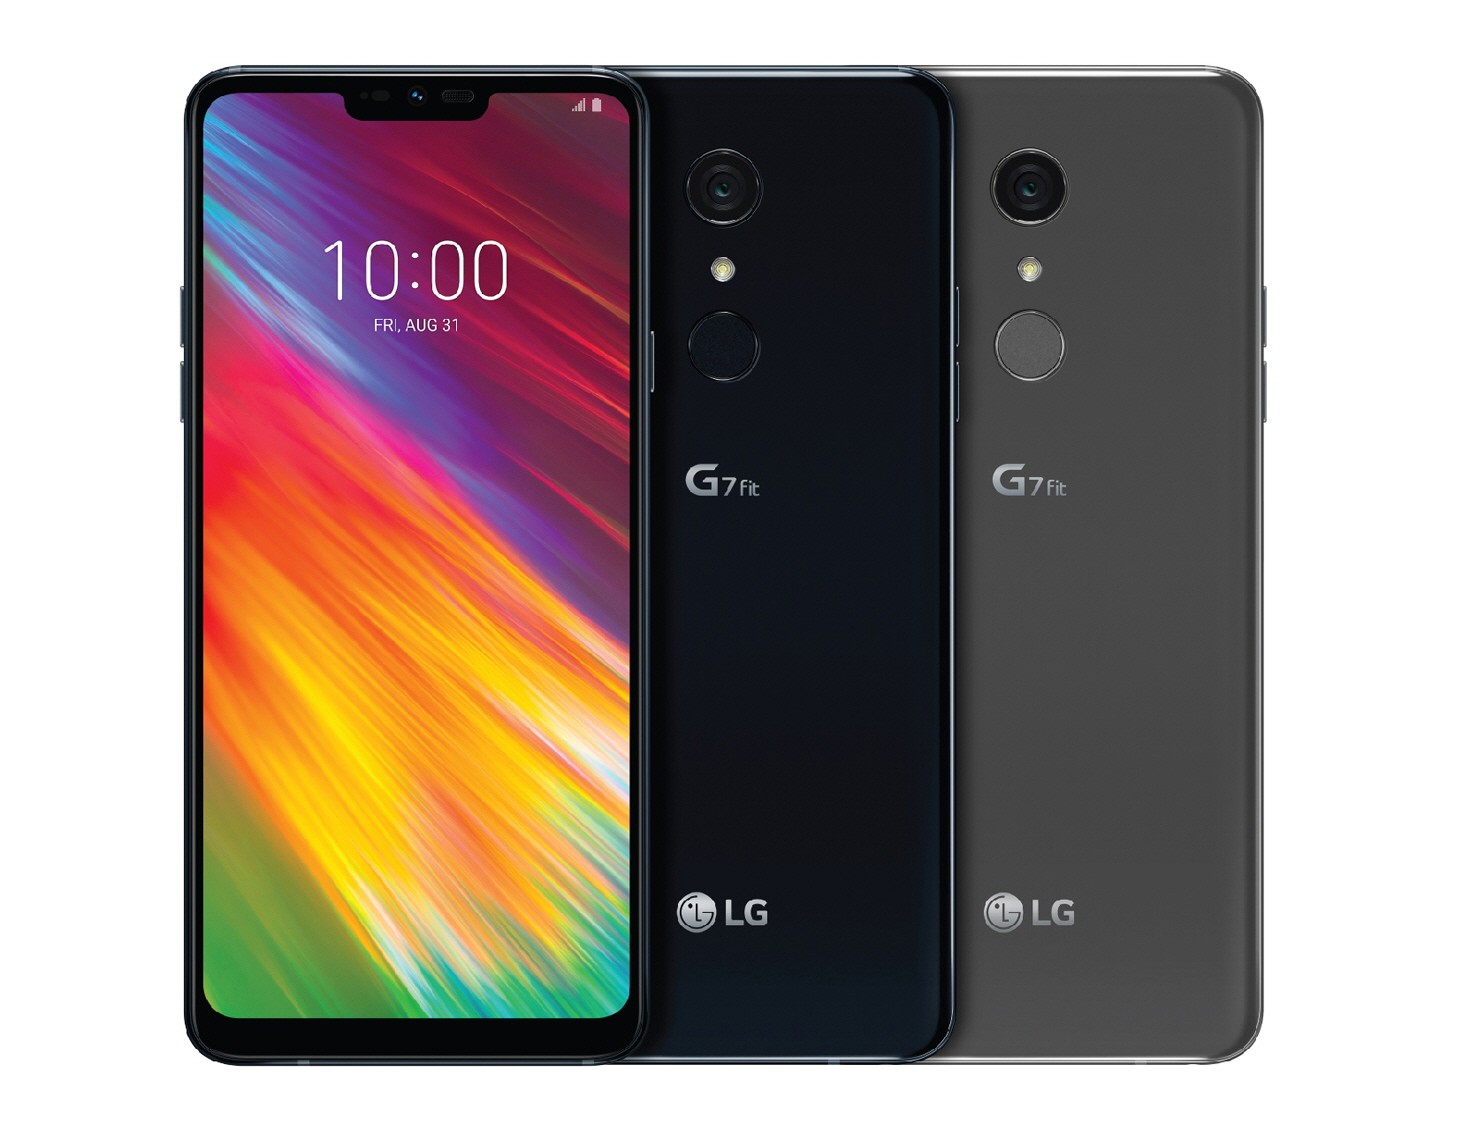 The front and rear view of the LG G7 Fit in New Aurora Black and New Platinum Gray